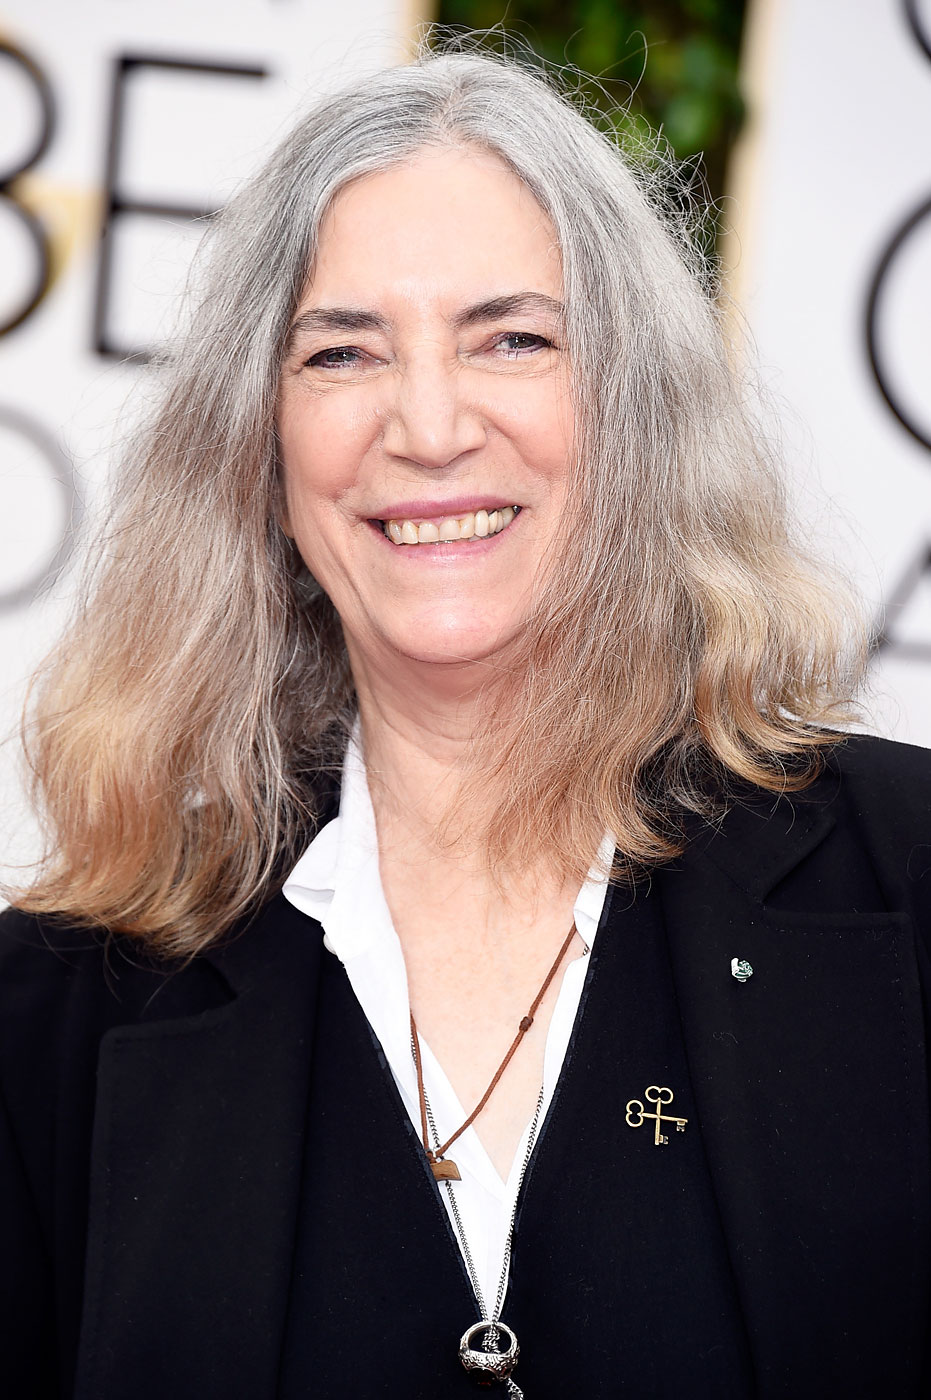 Patti Smith attends the 72nd Annual Golden Globe Awards at The Beverly Hilton Hotel on Jan. 11, 2015 in Beverly Hills, Calif.